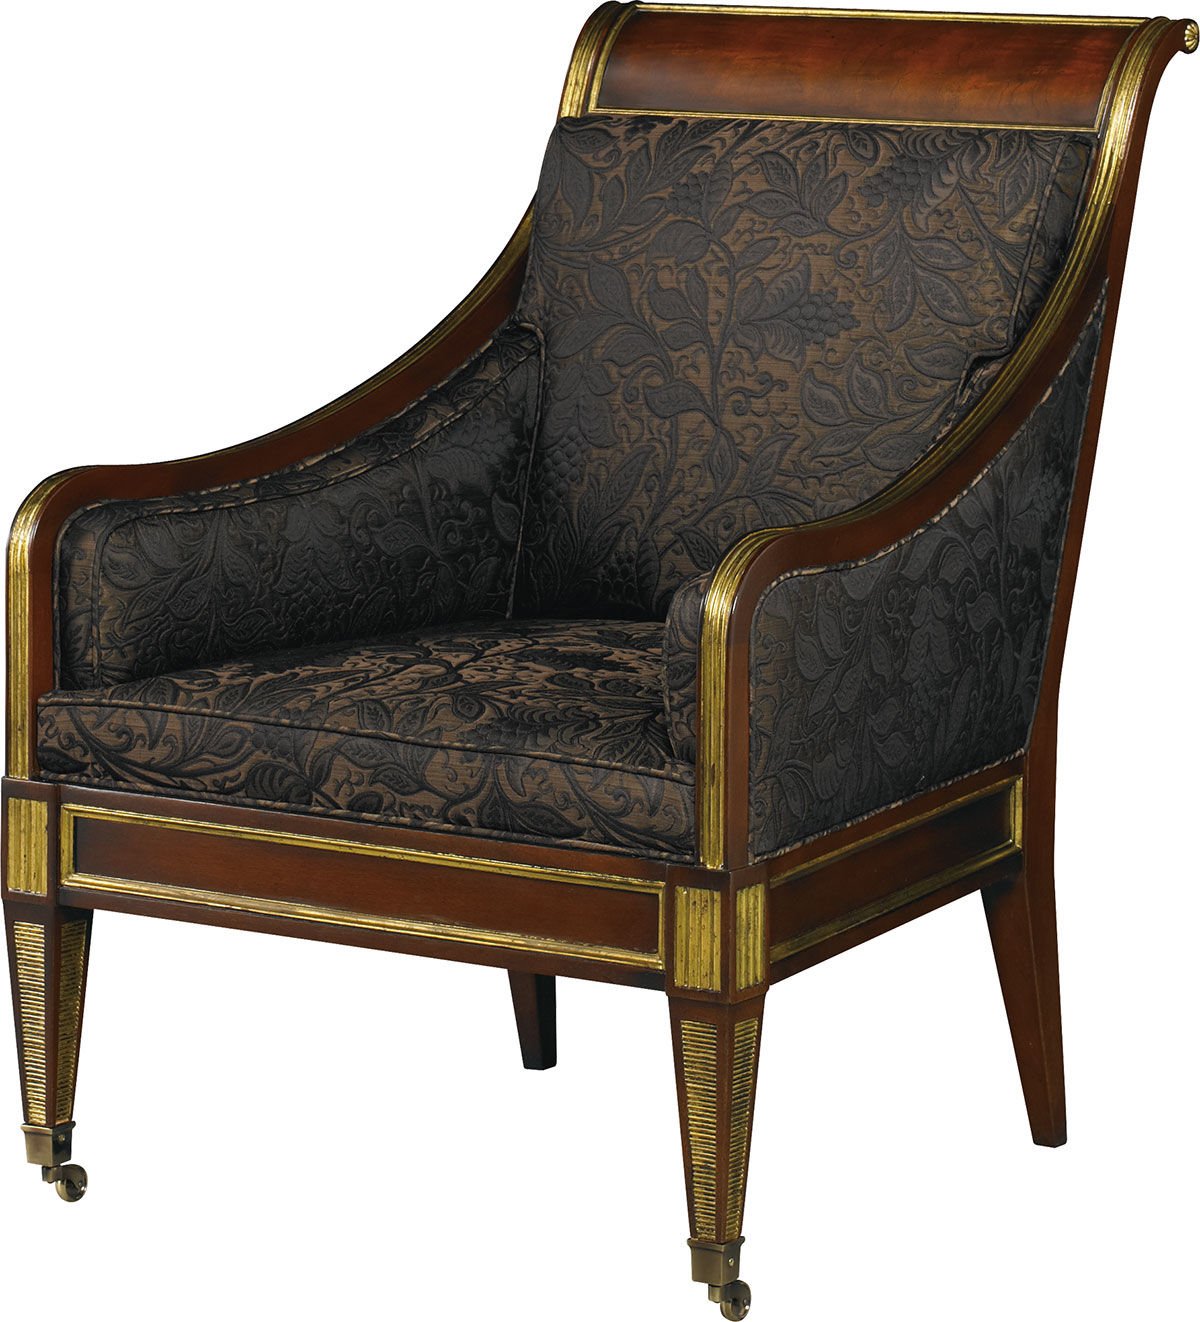 RUSSIAN REGENCY OCCASIONAL CHAIR